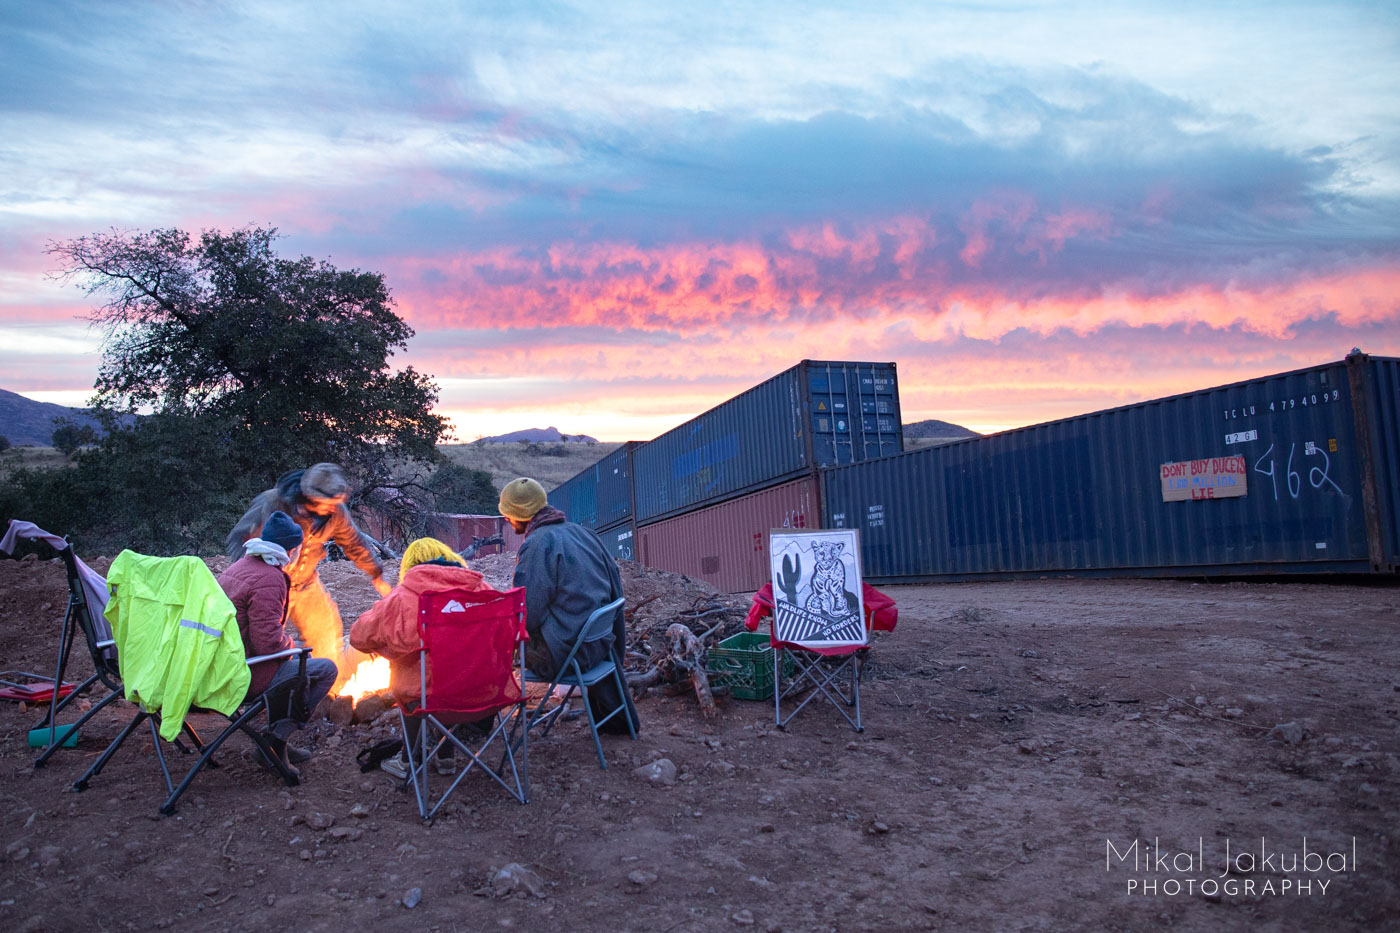 Four people gather in chairs around a small campfire at dawn, with magenta clouds to the east. Nearby in the shadows, shipping containers are stacked up to form a wall along the US-Mexico border.